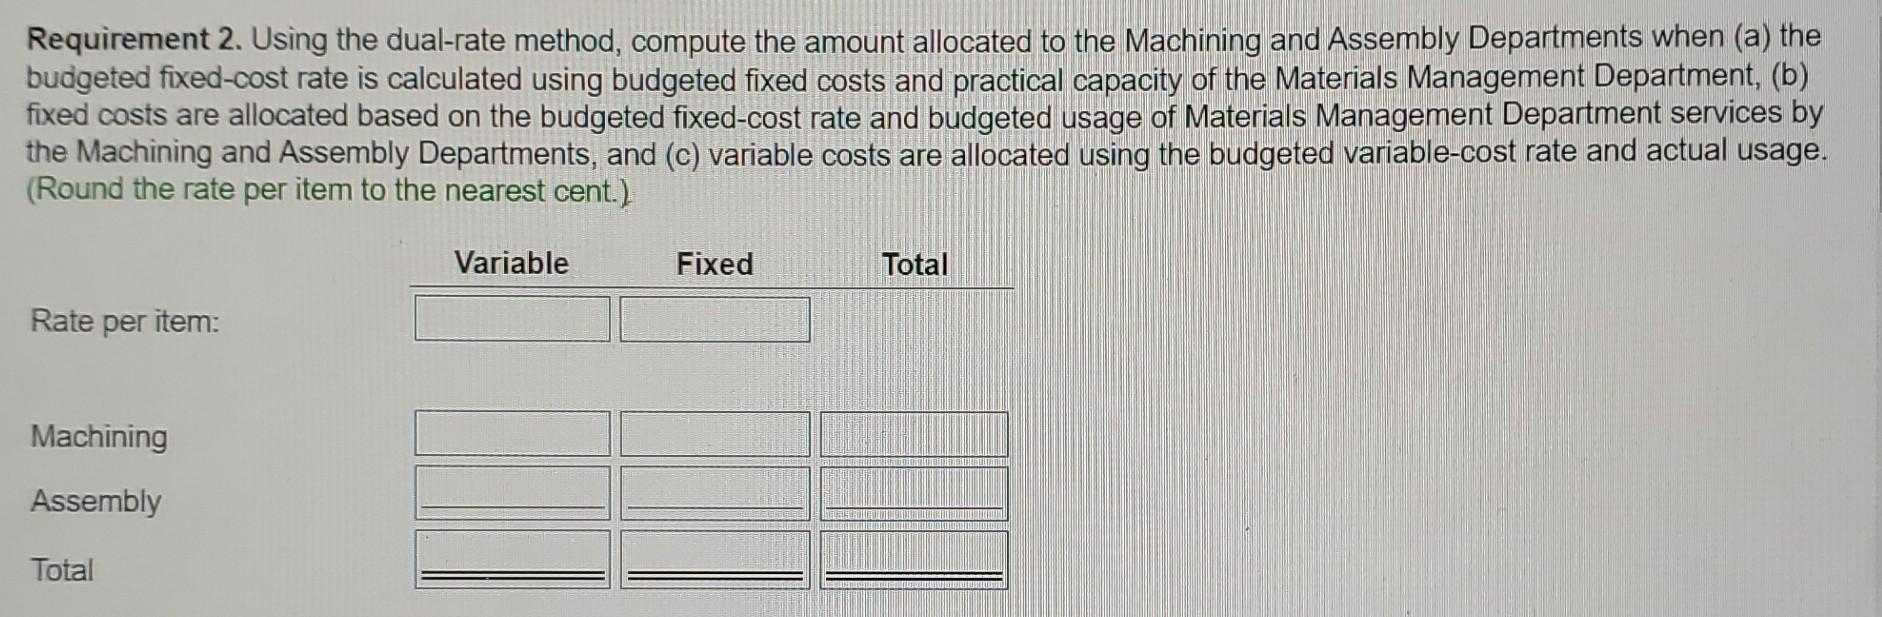 Requirement 2. Using the dual-rate method, compute the amount allocated to the Machining and Assembly Departments when (a) th